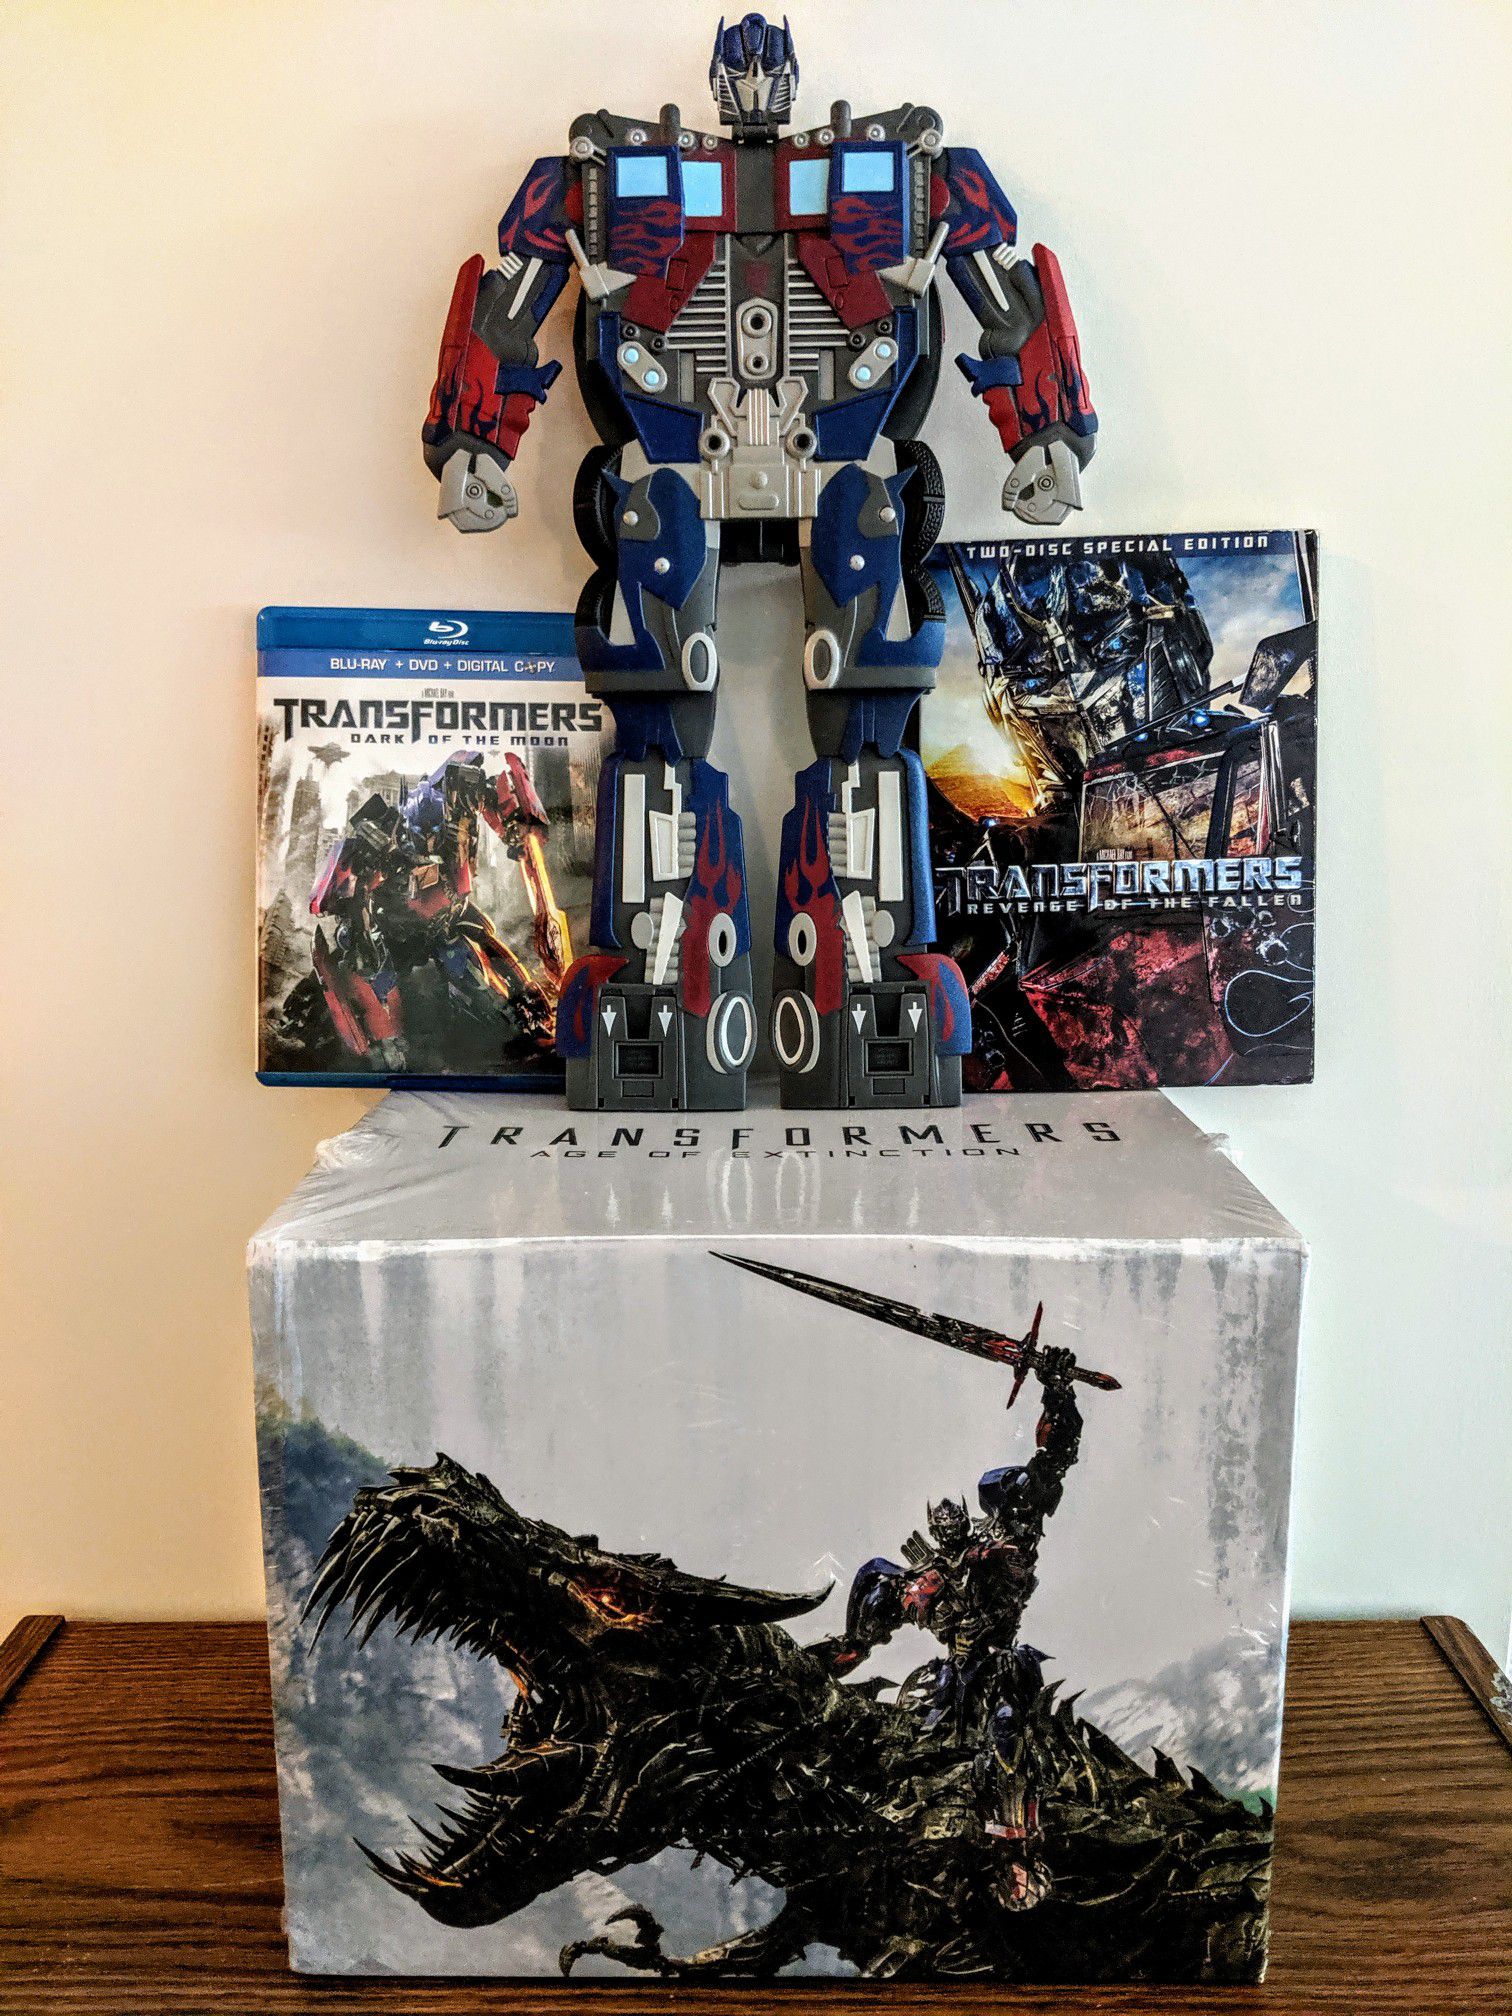 Transformers 1-4 collection!